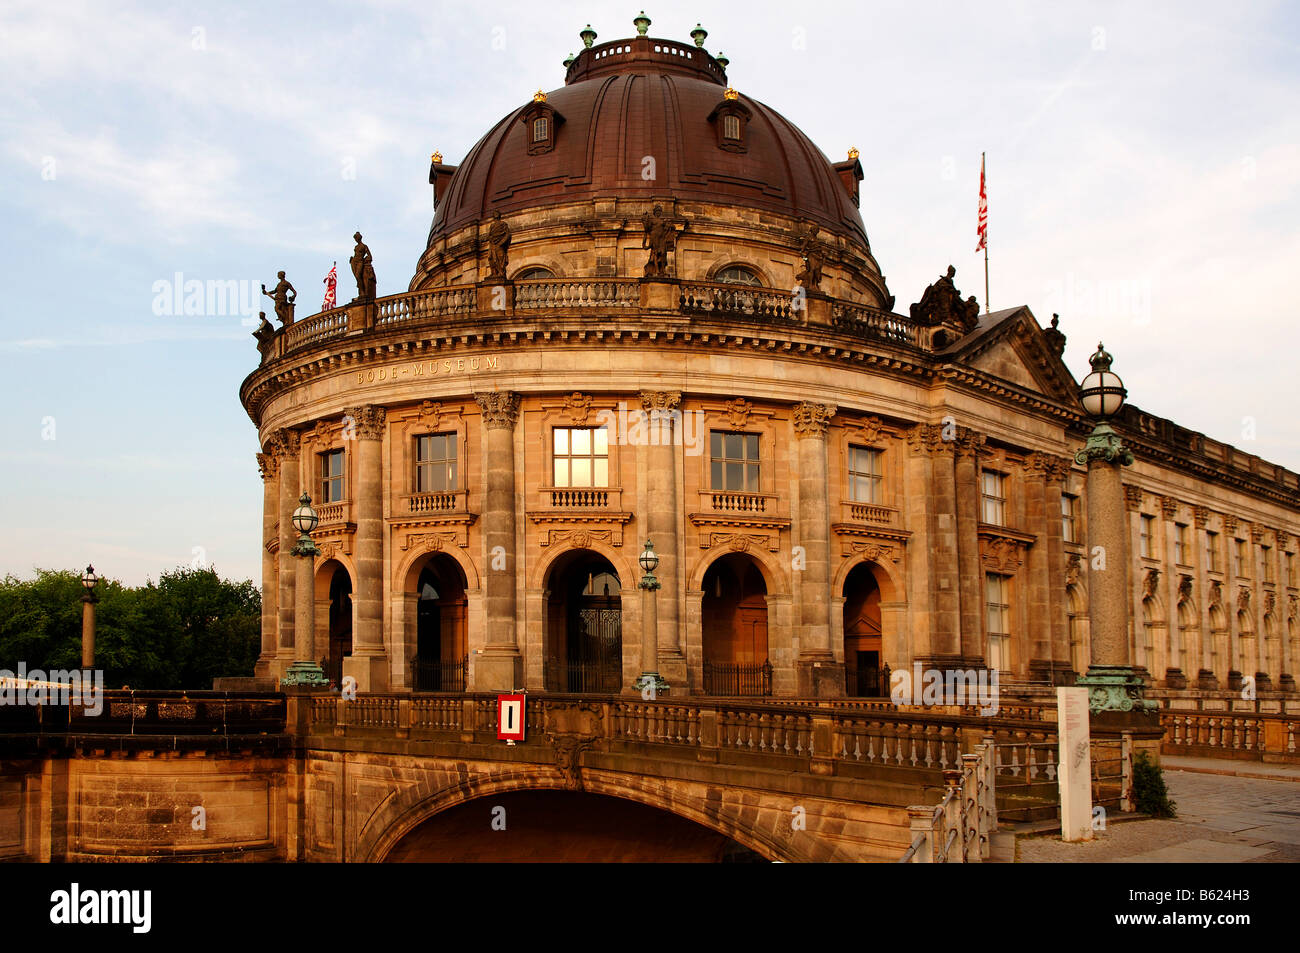 Bode-Museum at dusk, Berlin, Germany, Europe Stock Photo